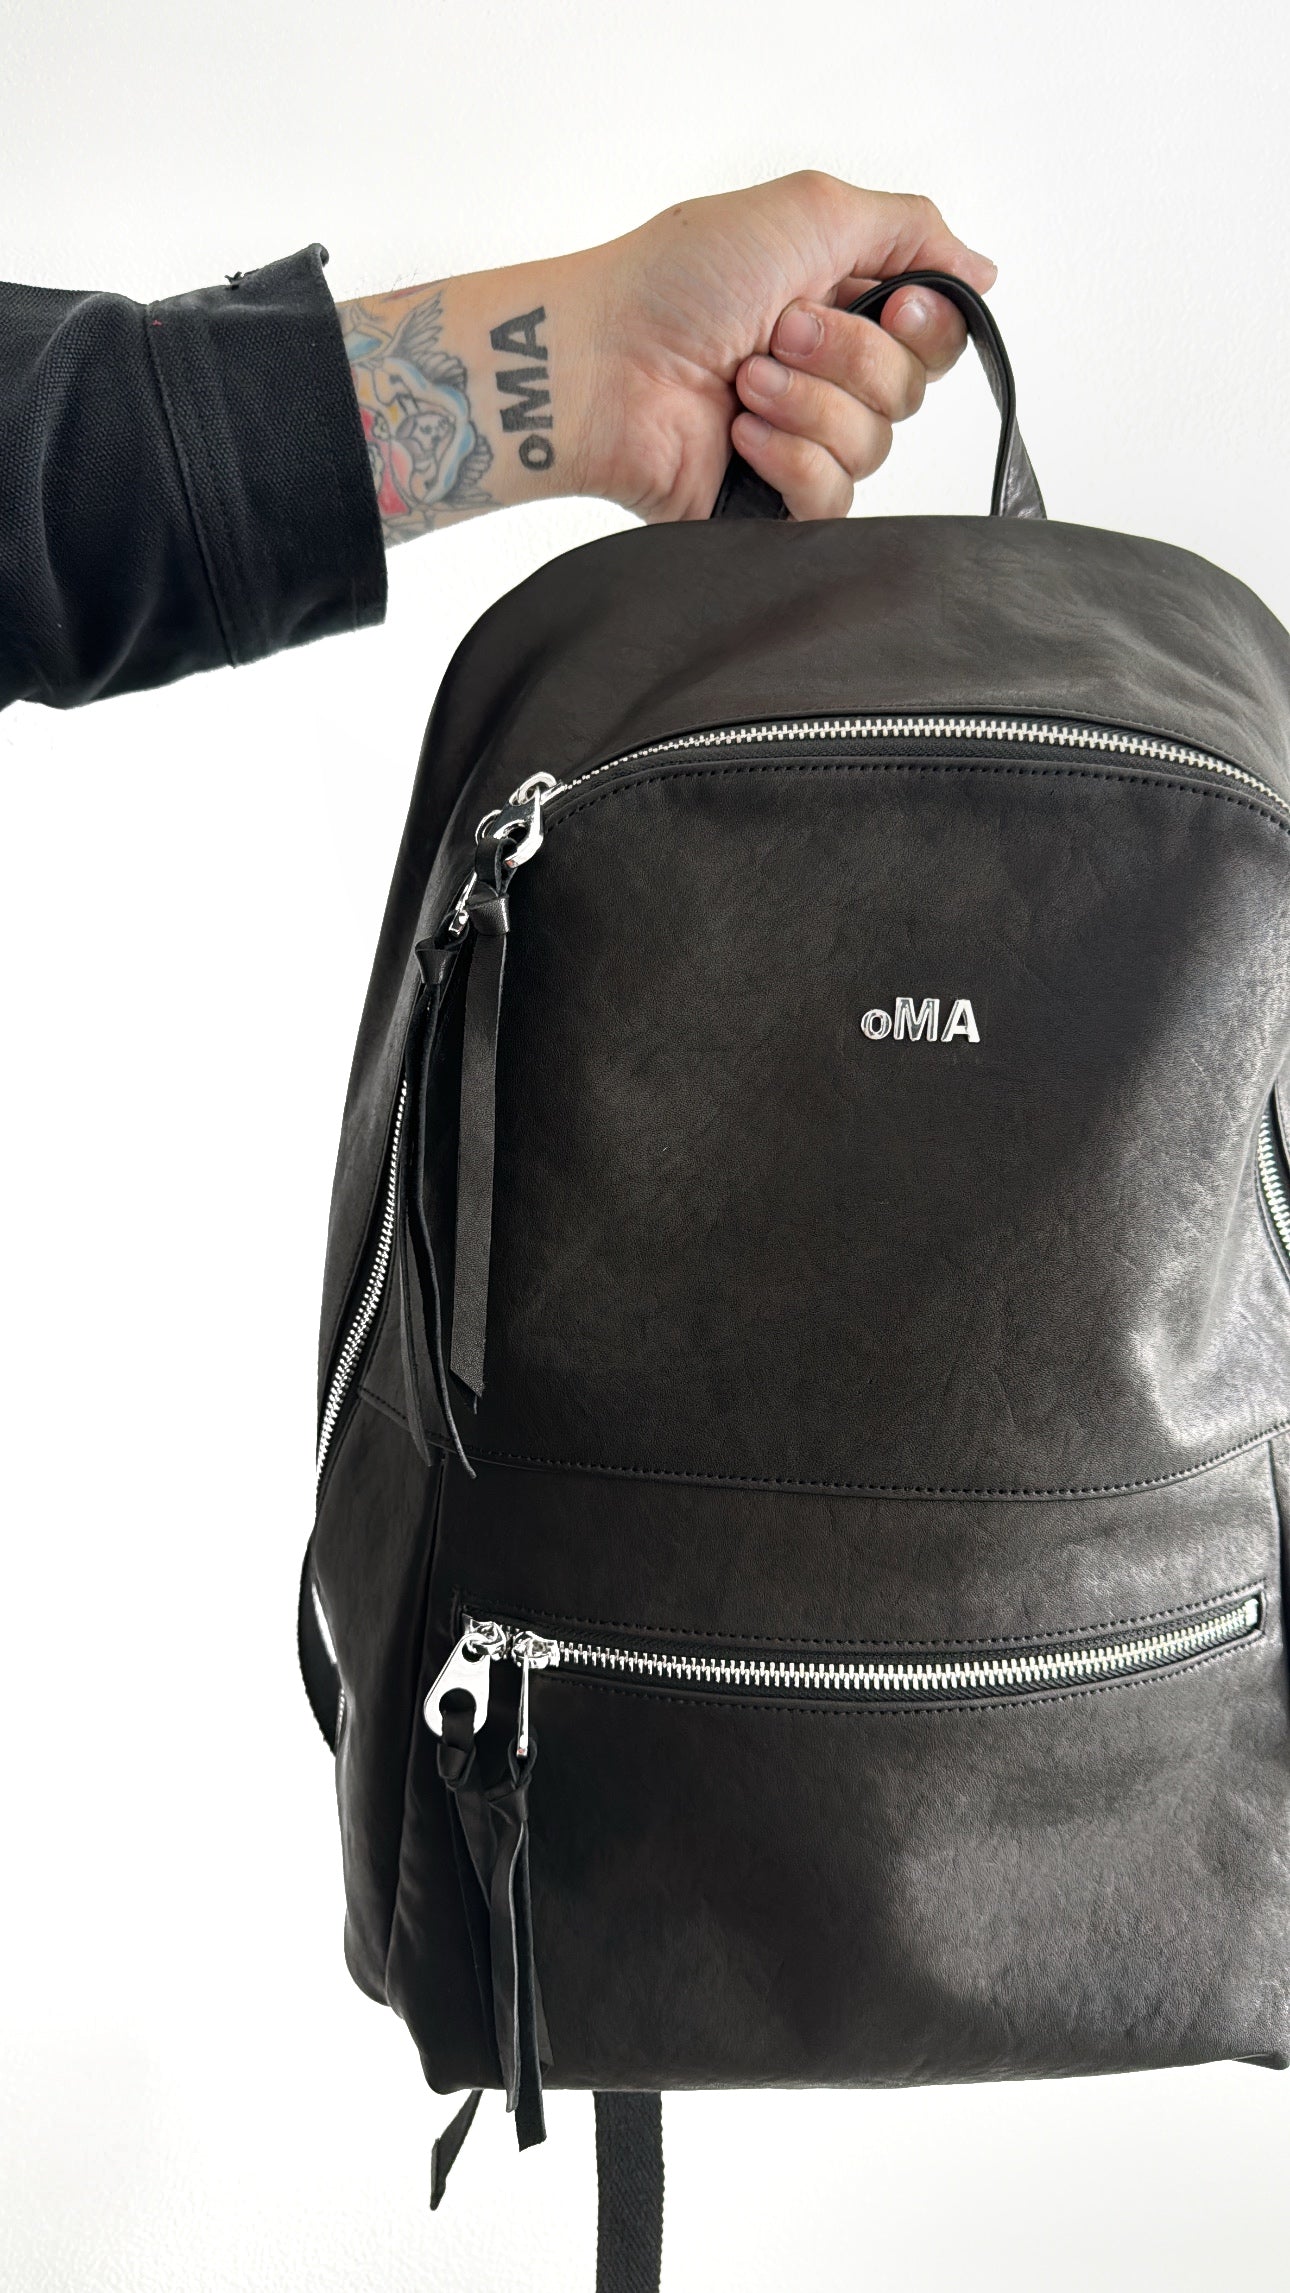 oMA LEATHER BACKPACK FIRST LOOK